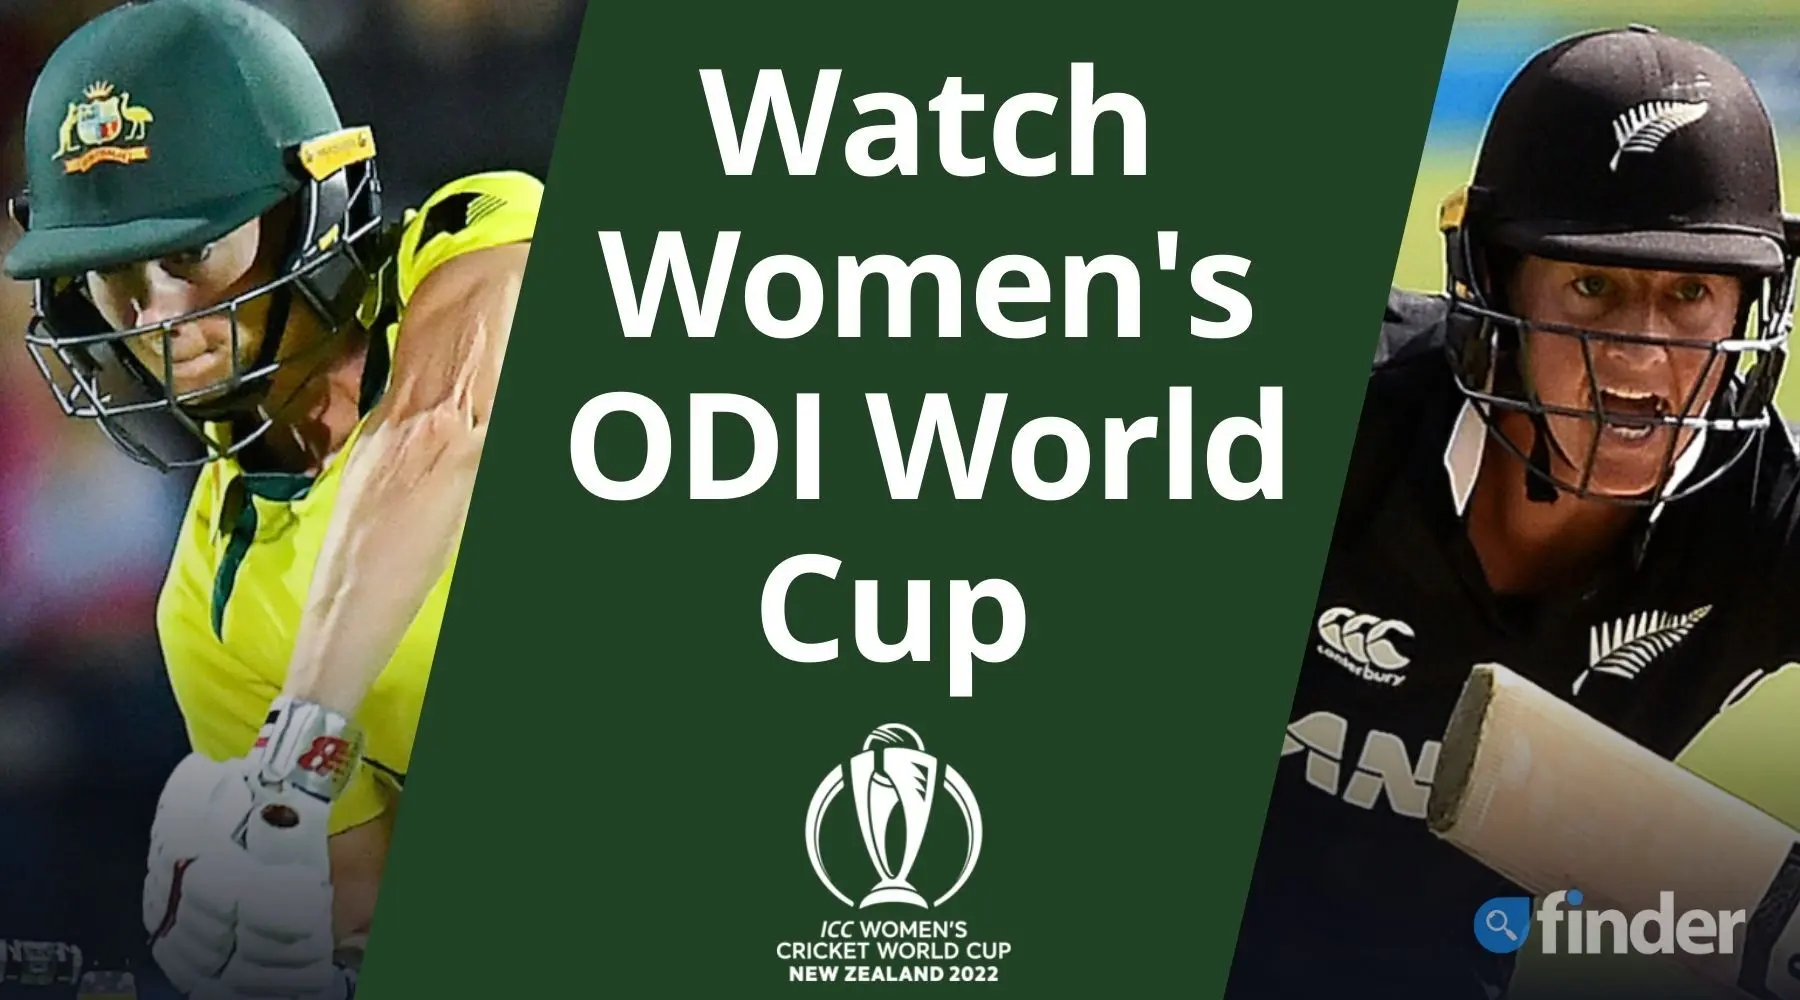 How to watch the Womens ODI World Cup live and free in Australia